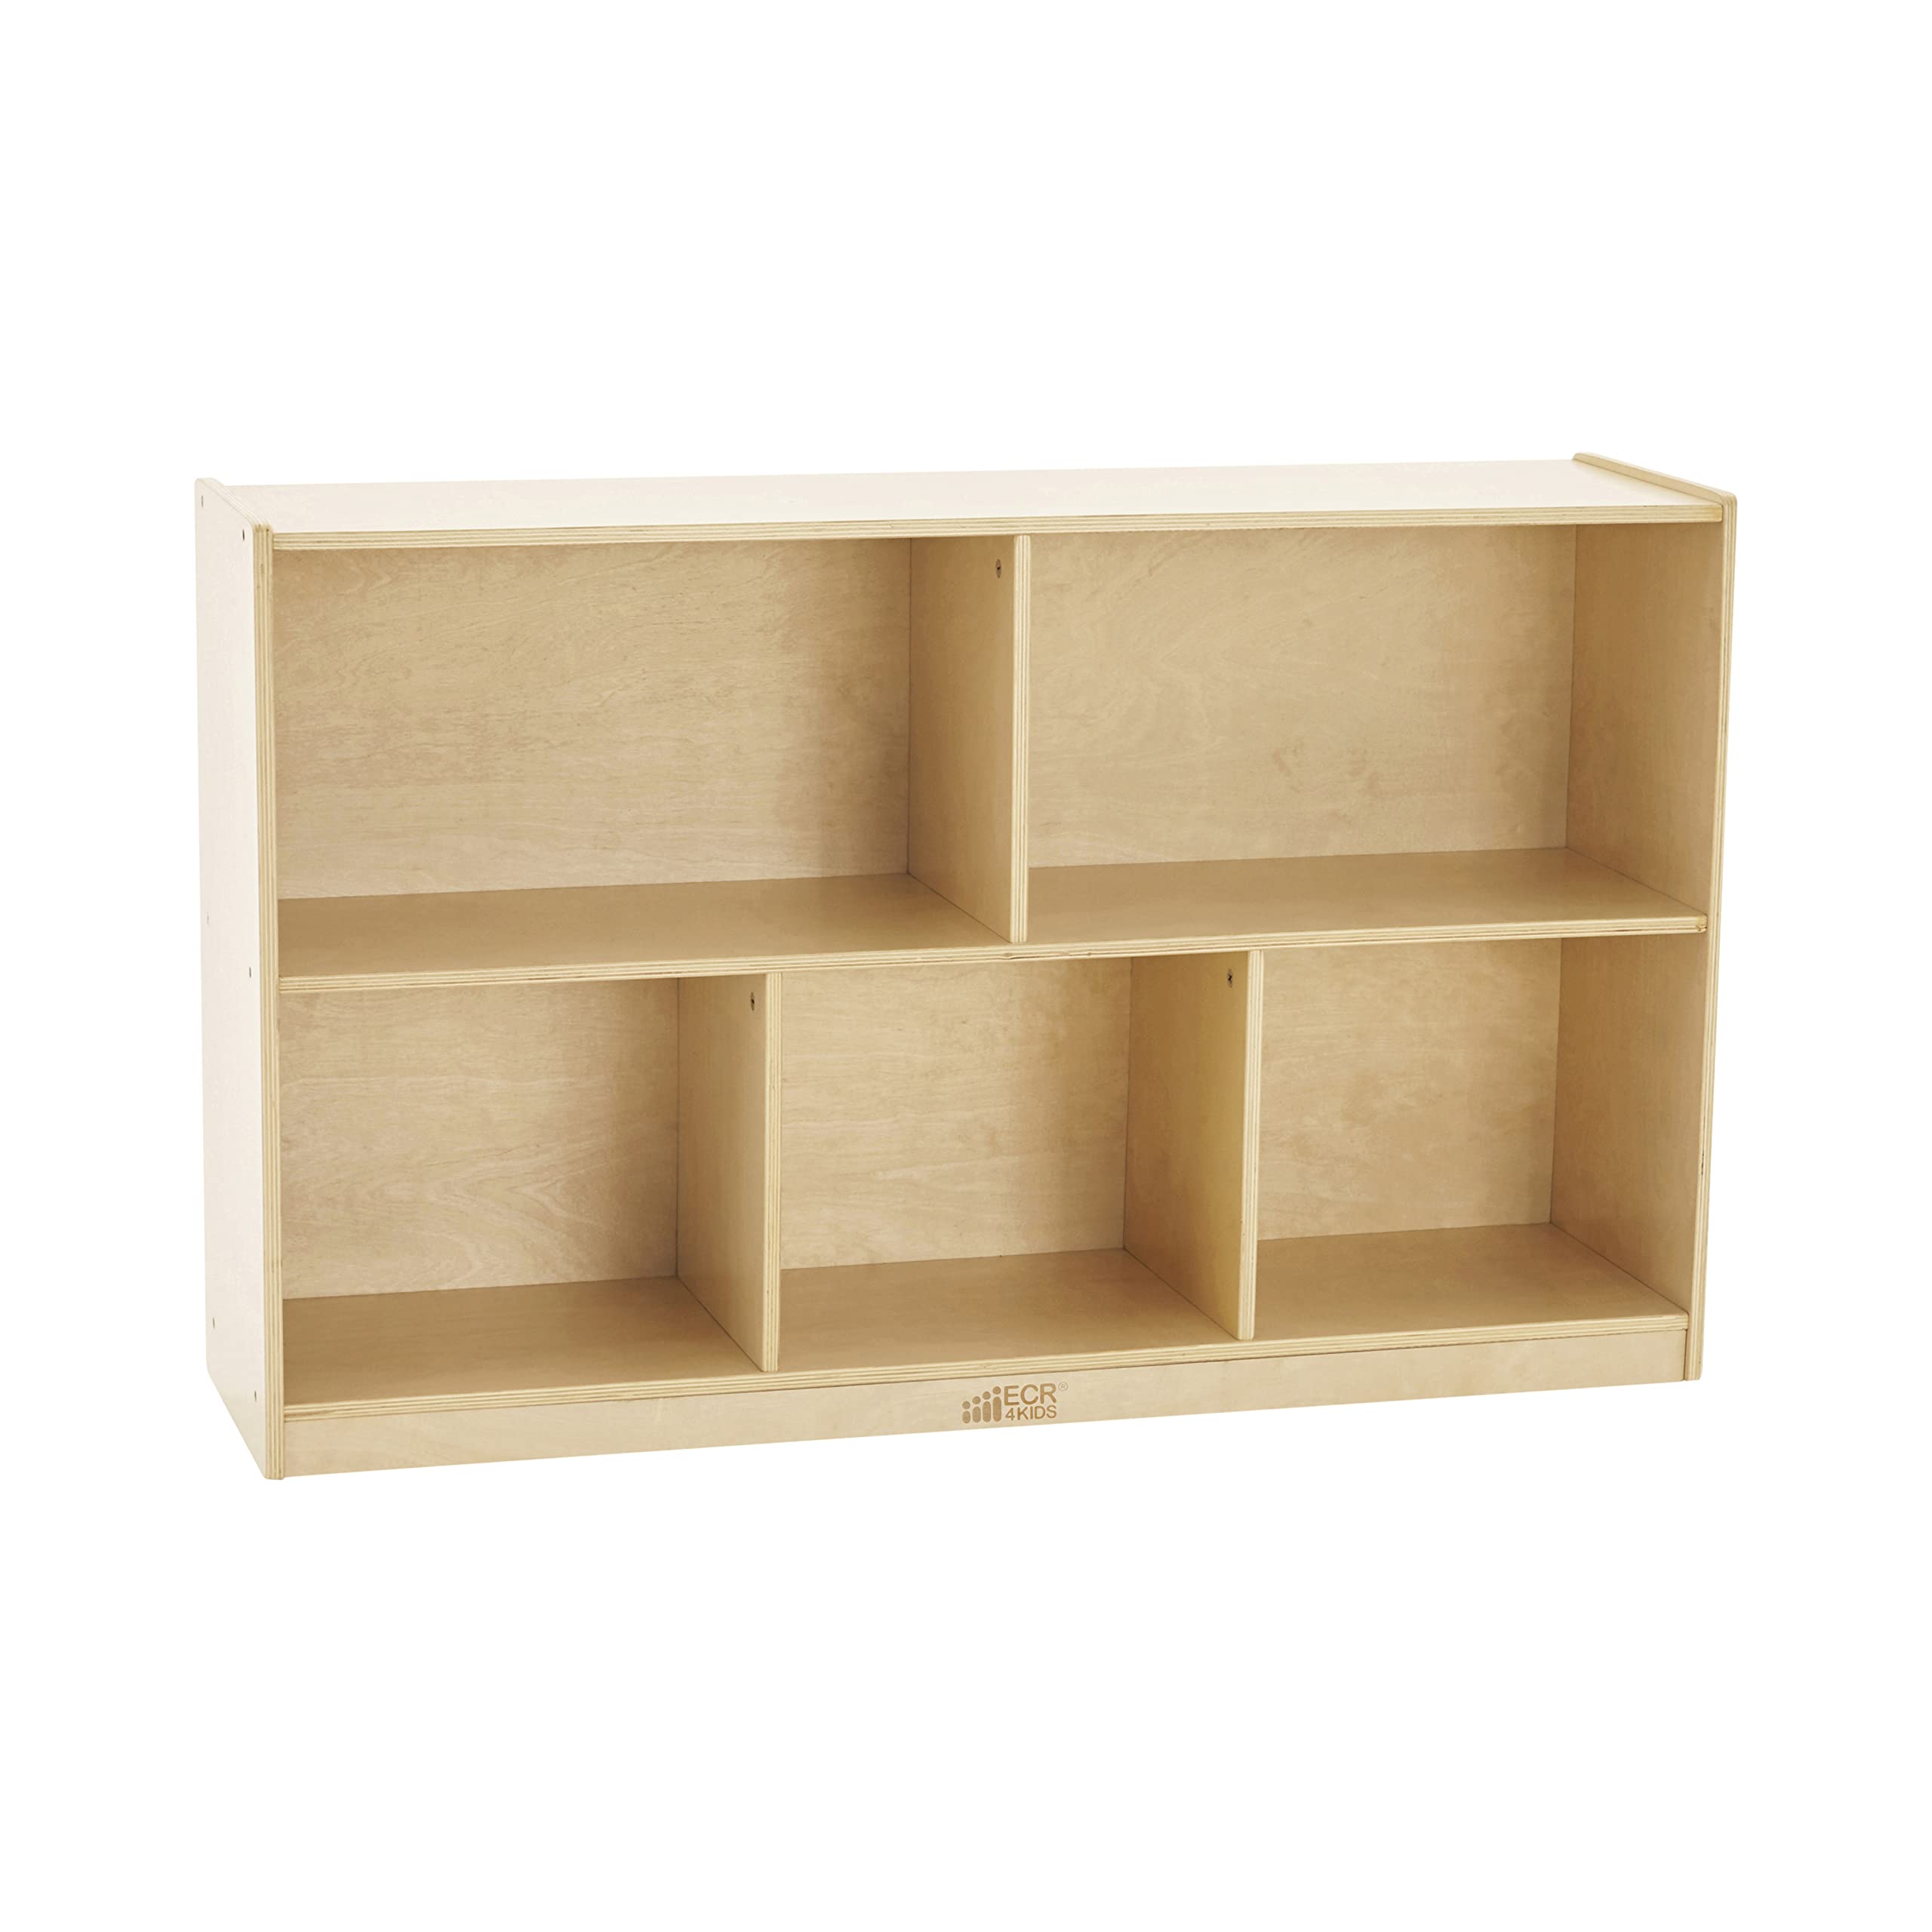 ECR4Kids - ELR-0420 Birch 5-Section School Classroom Storage Cabinet with Casters, Natural, 30